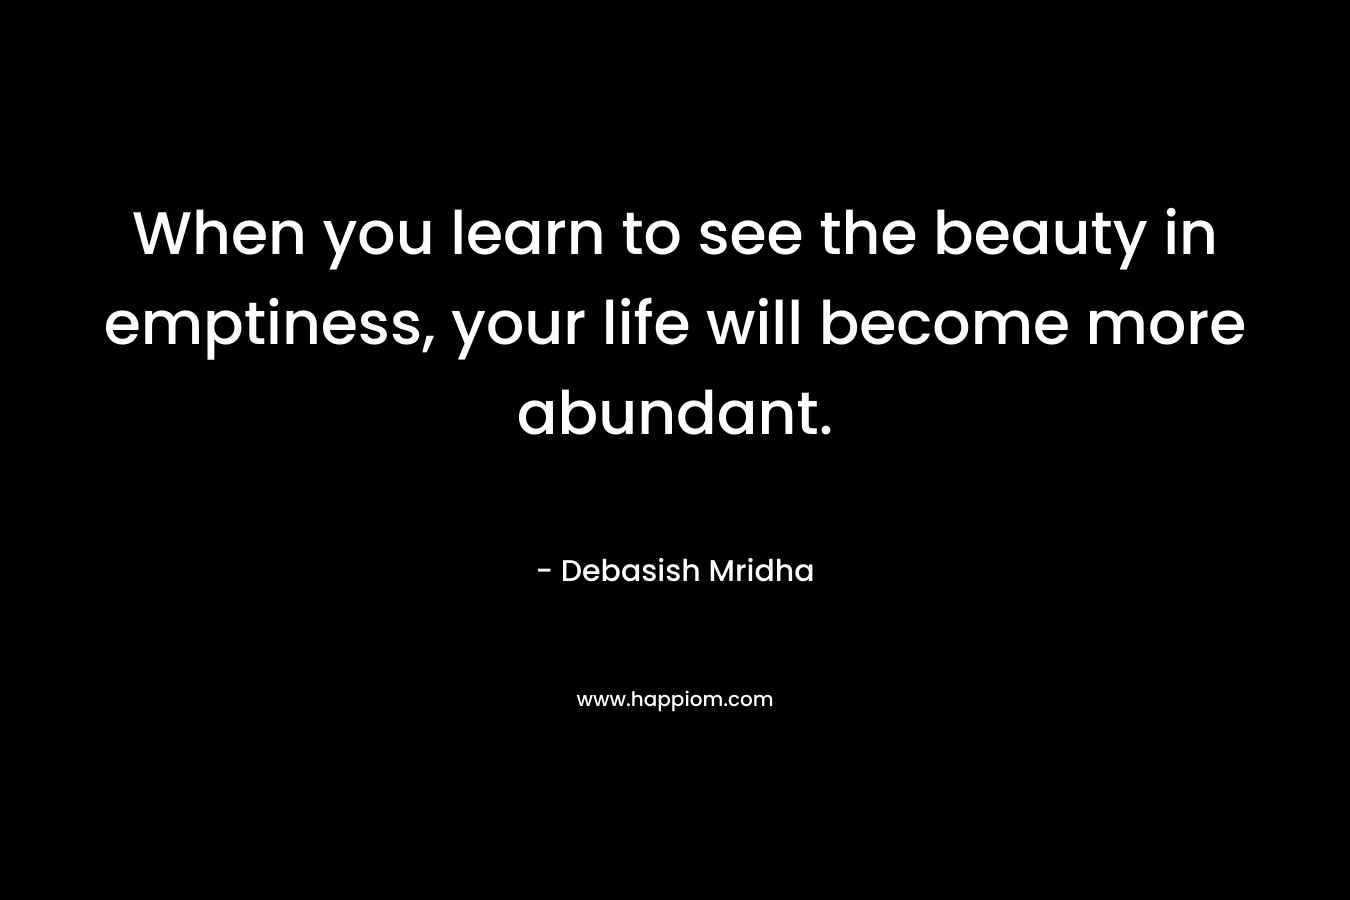 When you learn to see the beauty in emptiness, your life will become more abundant. – Debasish Mridha